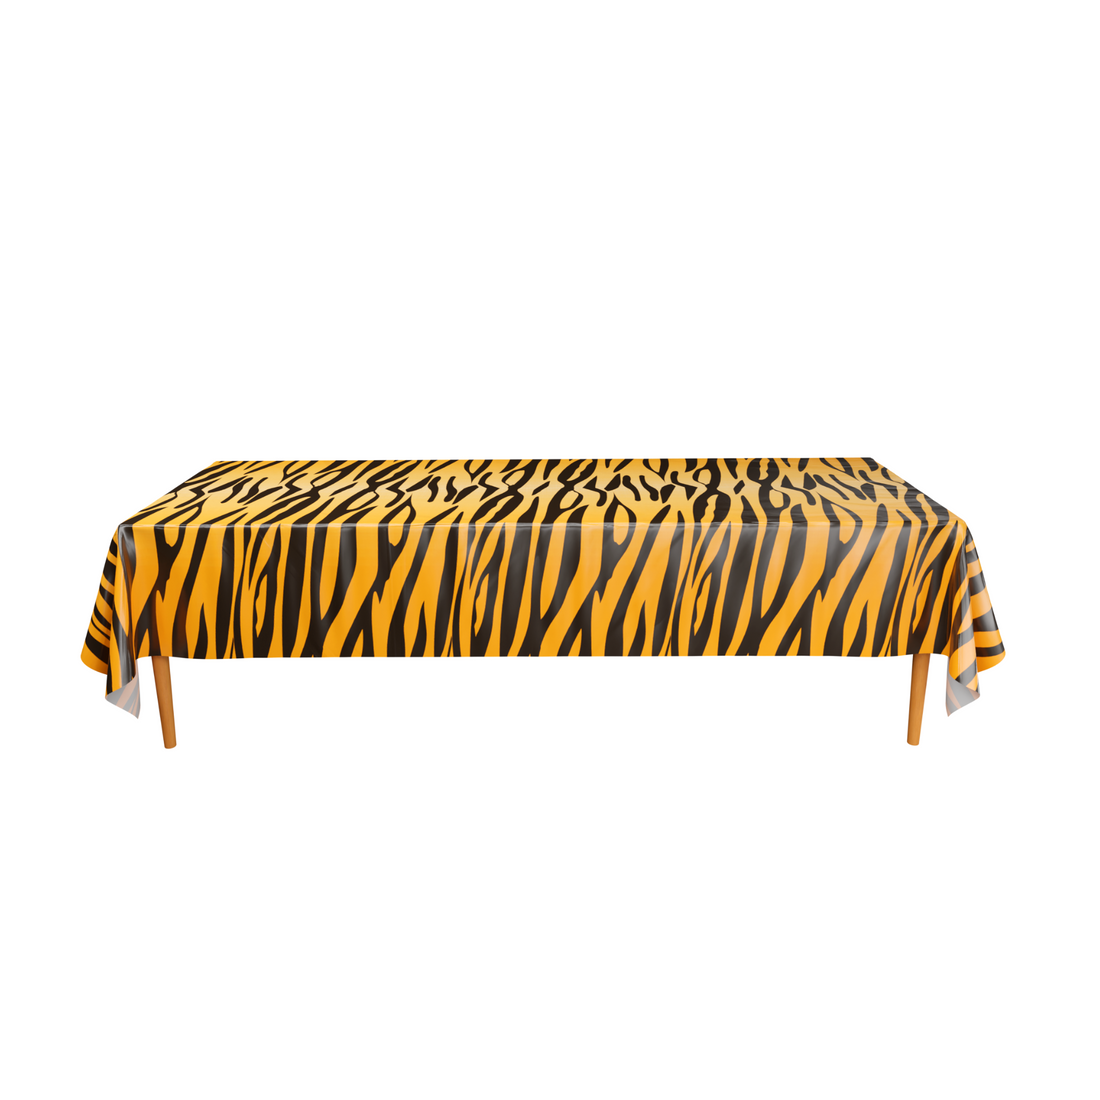 Get Wild with Discount Party Supplies' Tiger Stripe Table Cover